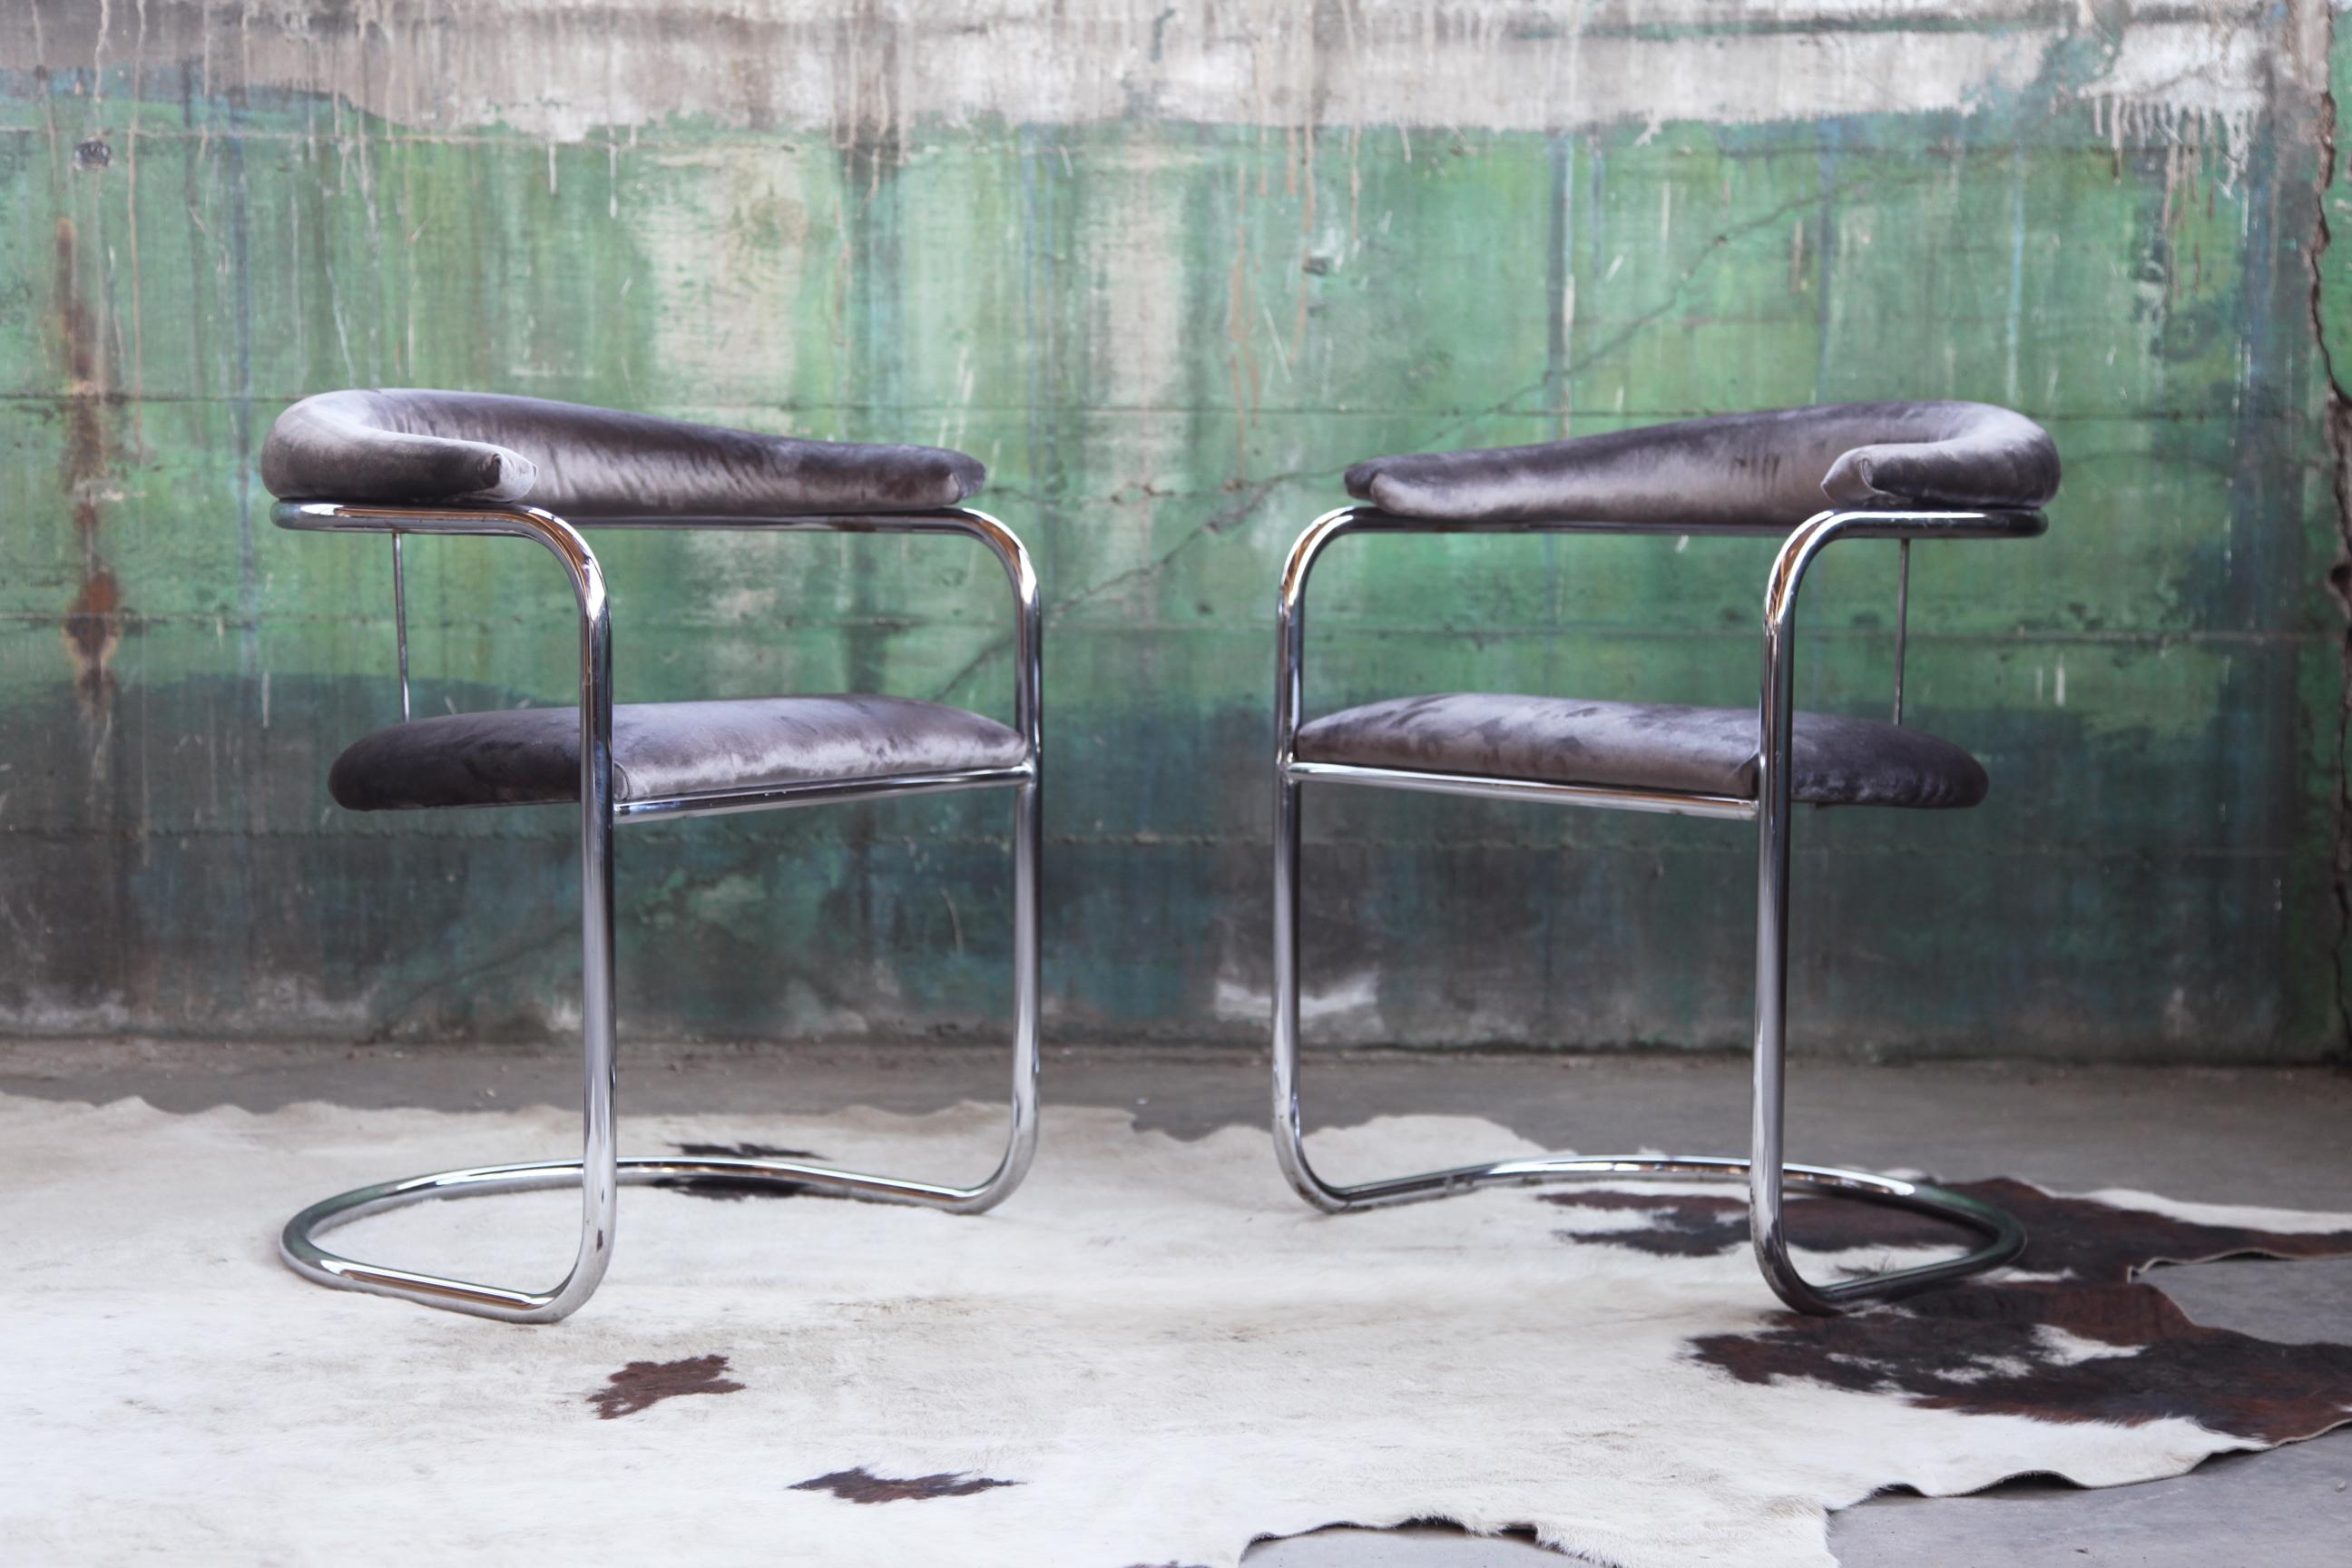 20th Century Pair of Mid-Century Modern Anton Lorenz for Thonet Bent Chrome Cantilever Chairs